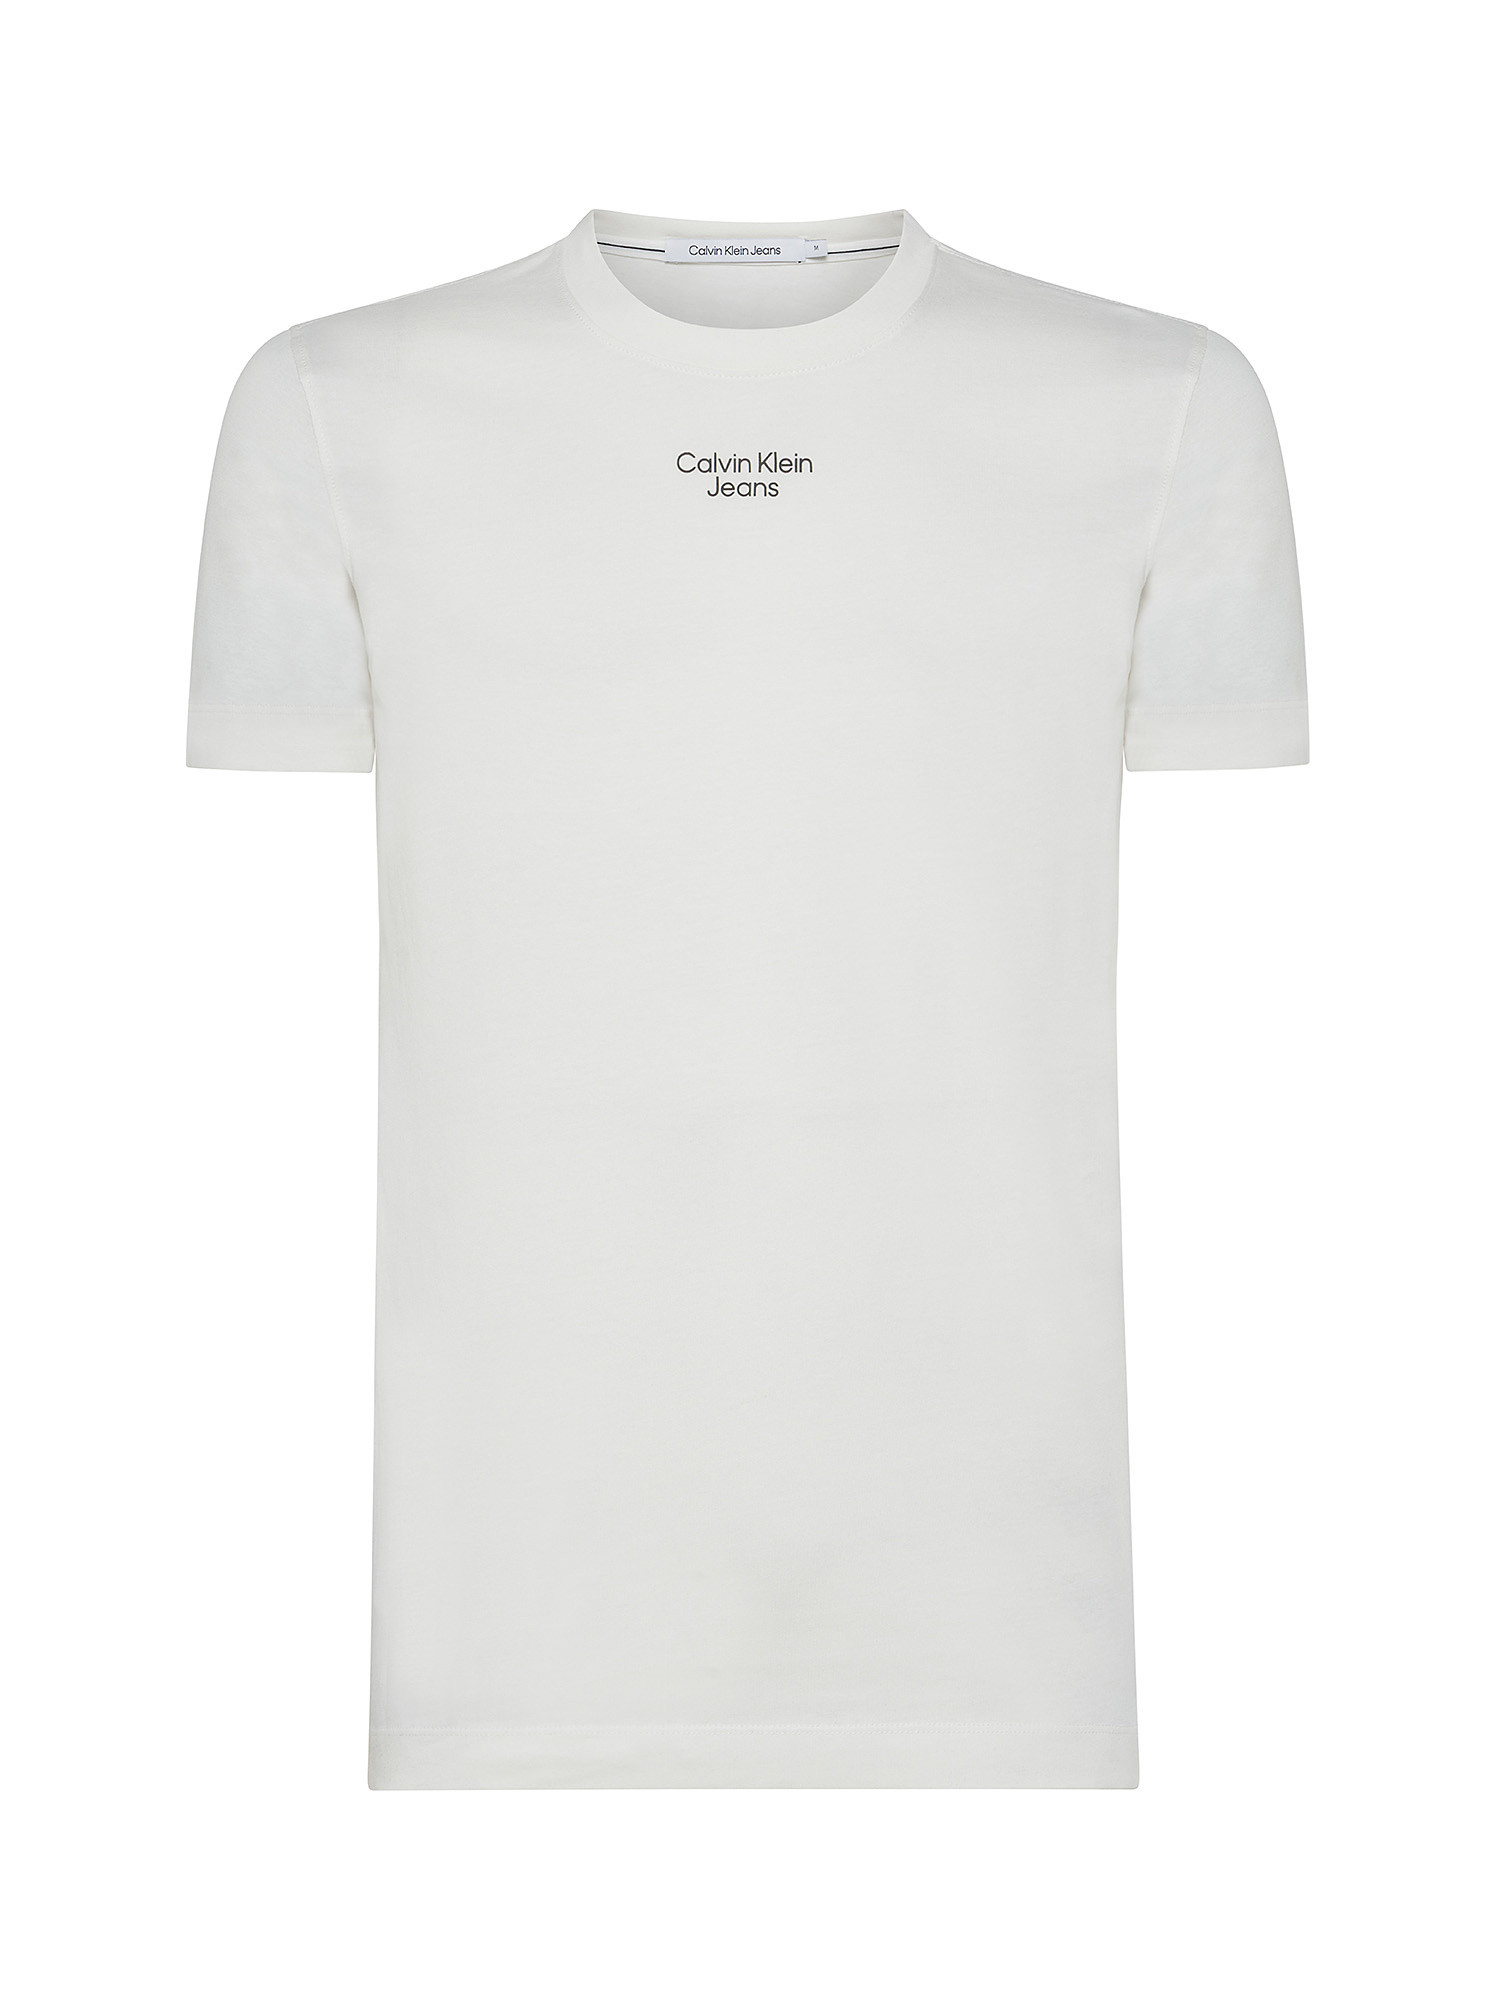 Calvin Klein Jeans - Slim fit cotton T-shirt with logo, White, large image number 0